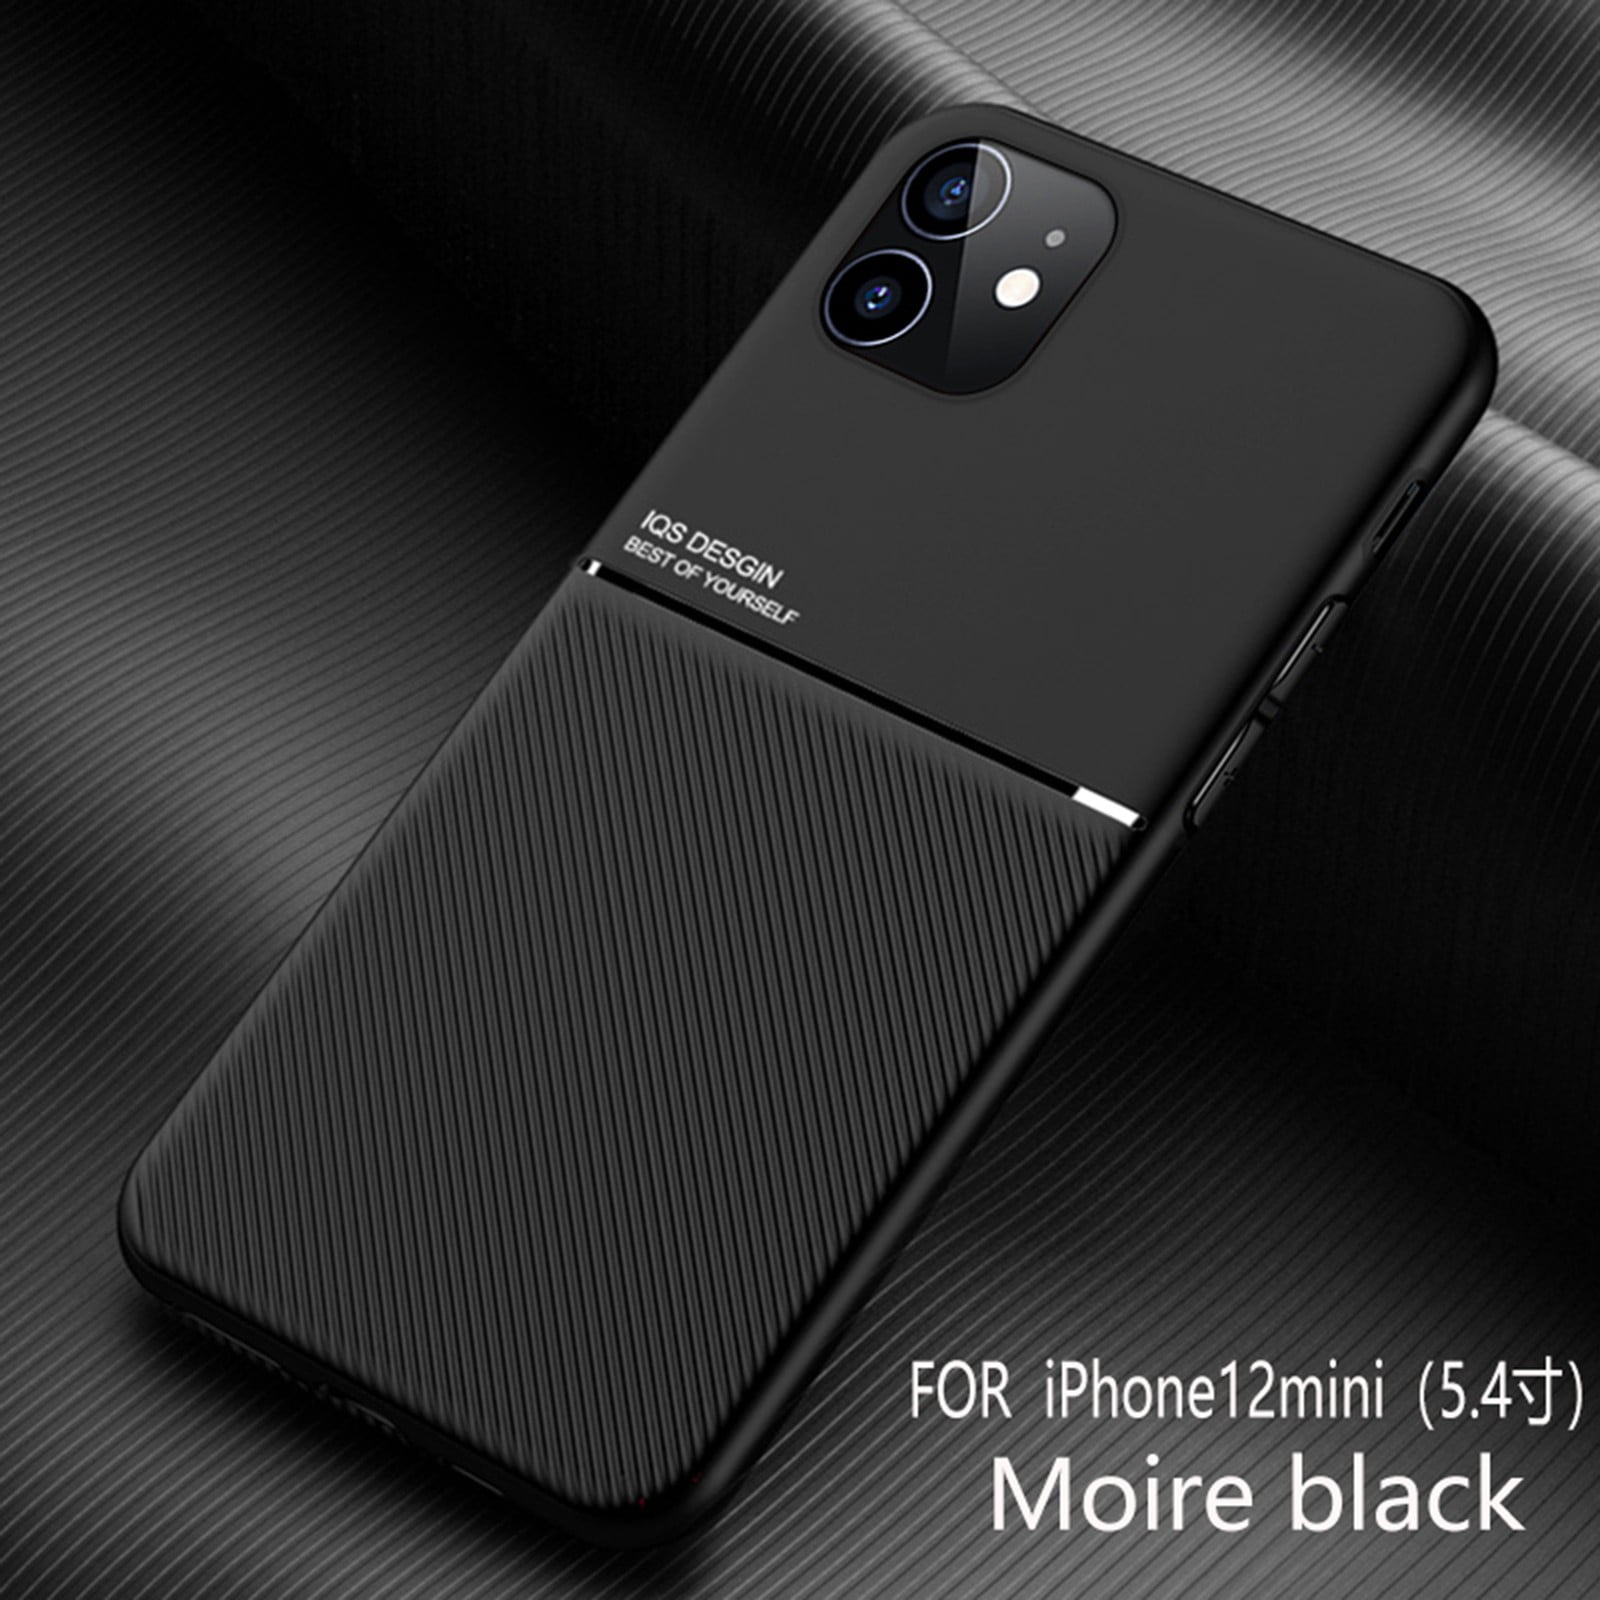 XTCASE Case with Mobile Phone Chain for Samsung Galaxy A10 Transparent Soft Flexible Silicone TPU Bumper Cover Smartphone Neck Strap Stylish and Super Practical Adjustable Length Black